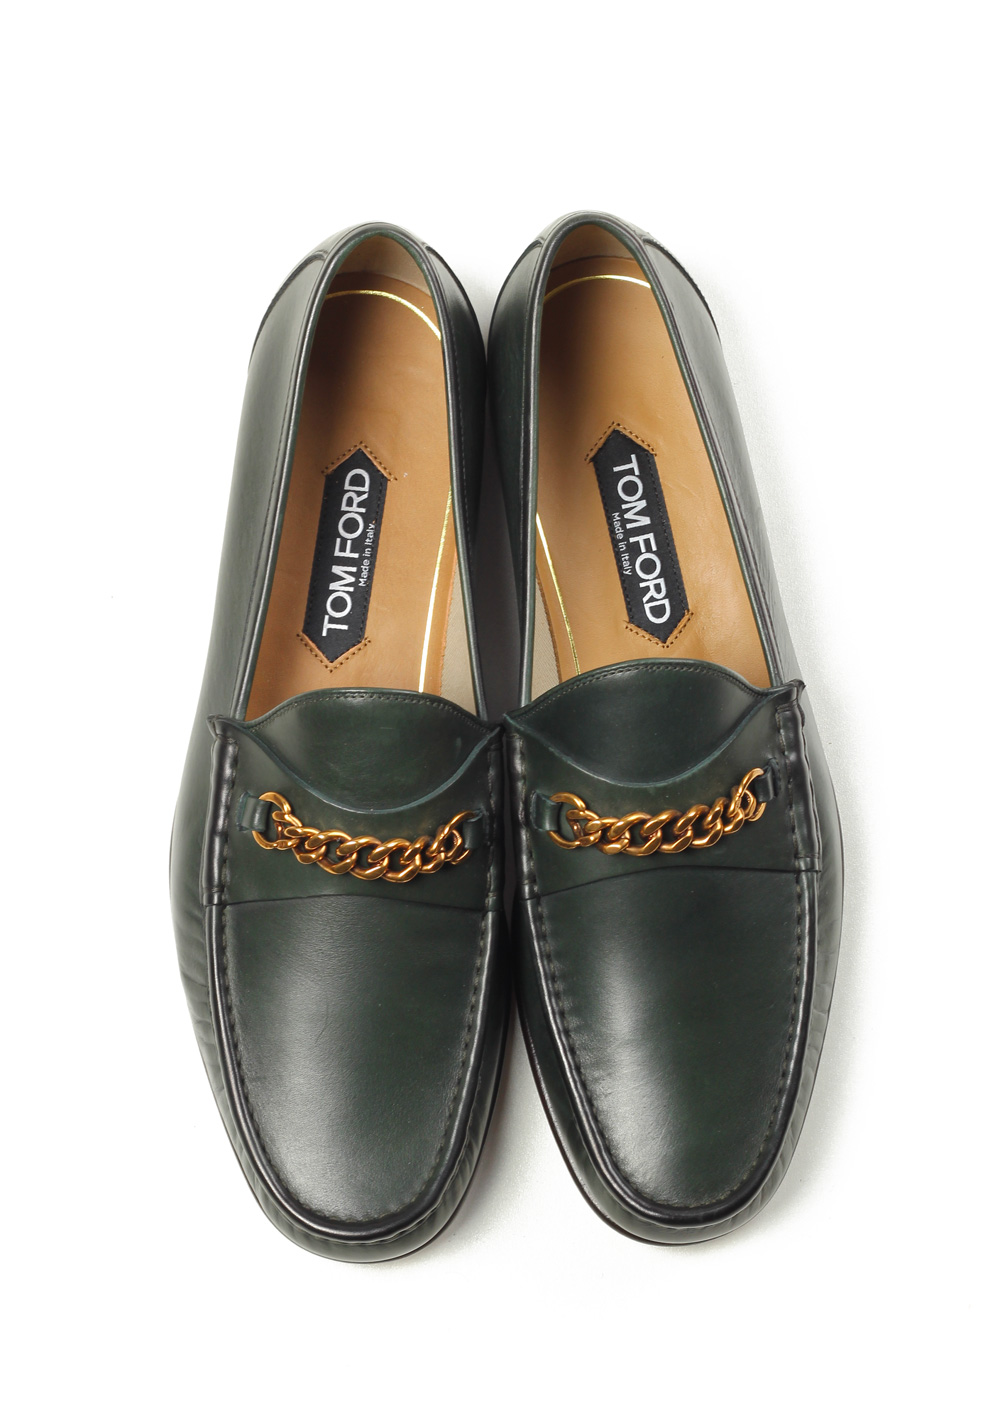 TOM FORD York Green Leather Chain Loafers Shoes Size 9 UK / 10 U.S. | Costume Limité